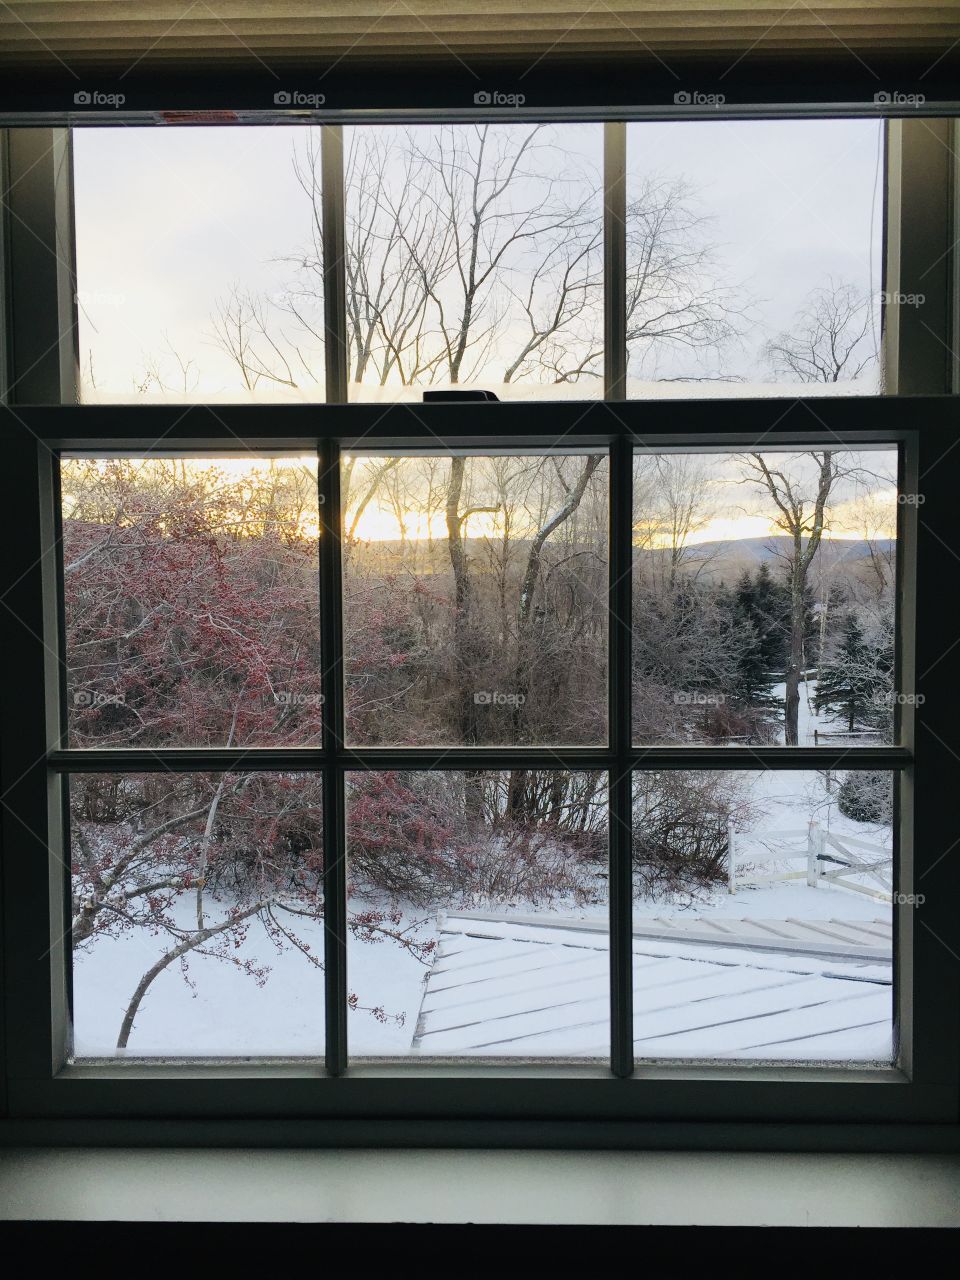 Sunrise in a Vermont winter as seen through a window. A tree full of red berries stands just outside as the sun peeks over he horizon at newly fallen snow.